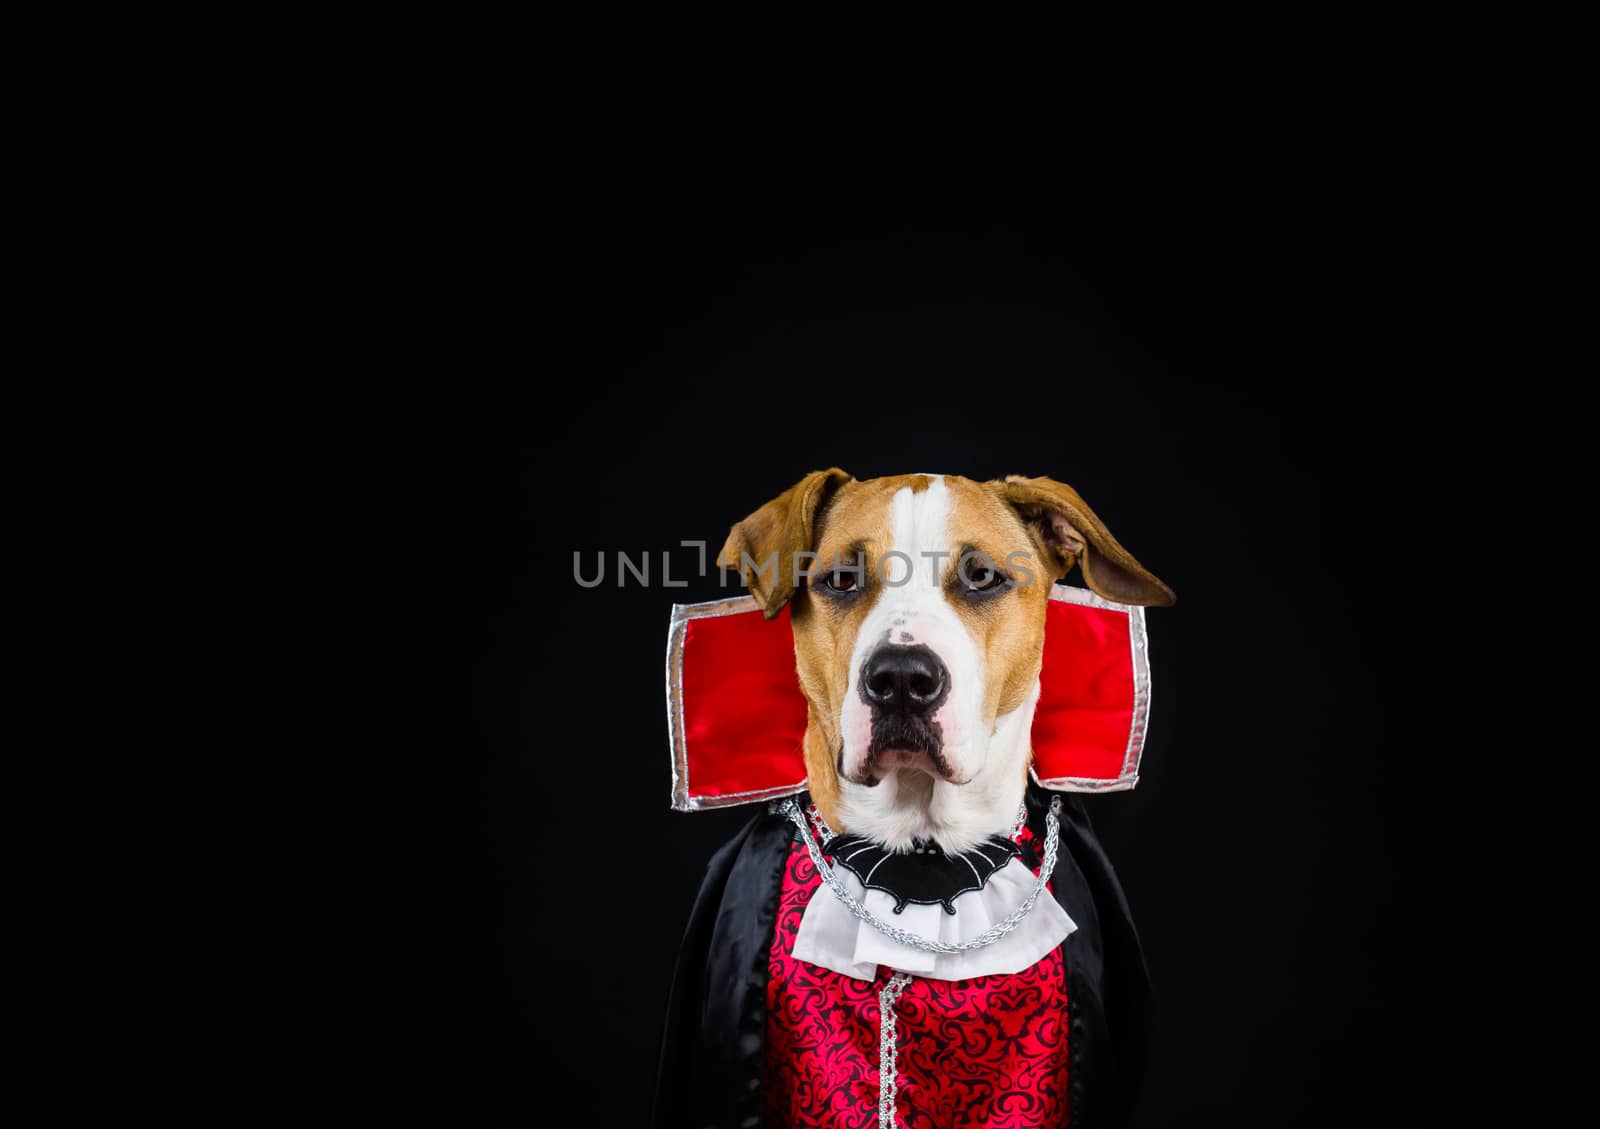 Dog dressed up for halloween in a vampire outfit posing in front of dark background